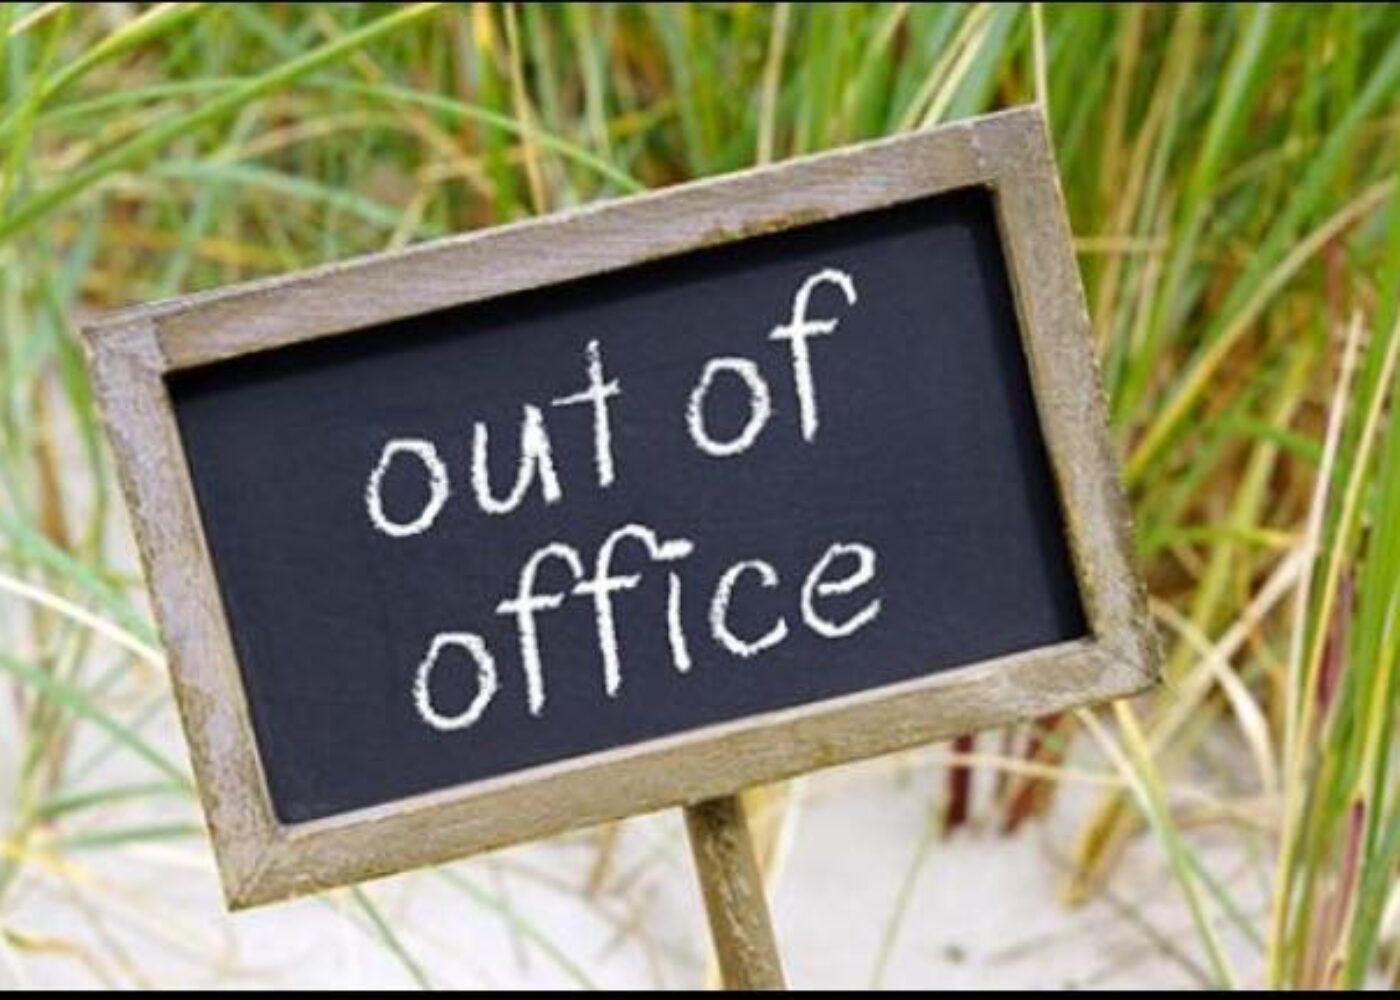 OUTofoffice